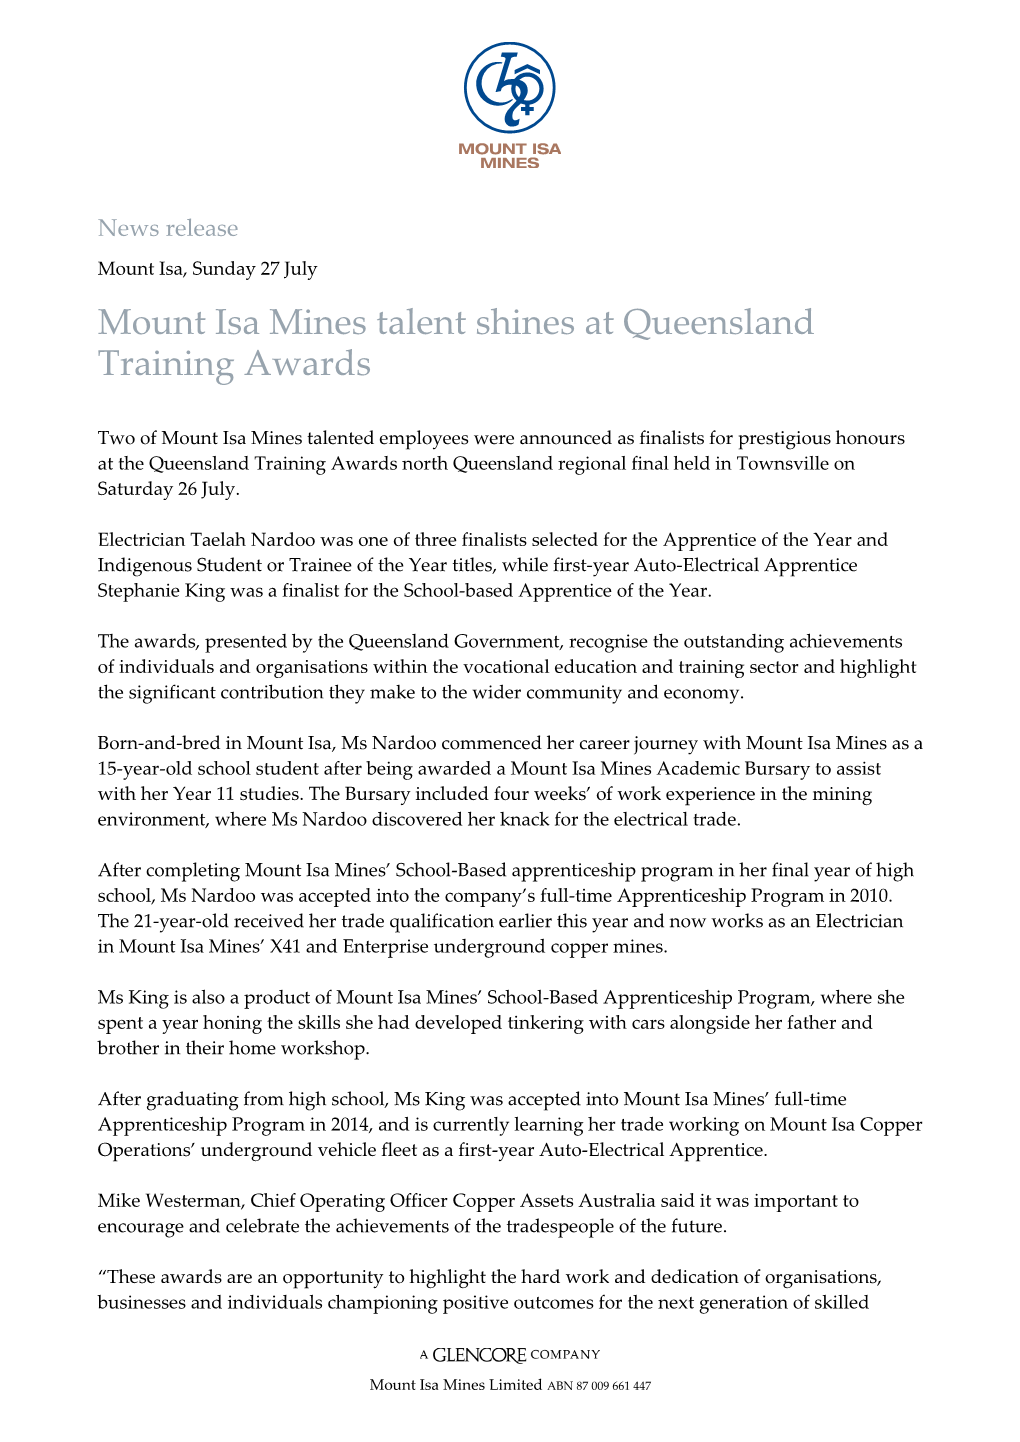 Mount Isa Mines Talent Shines at Queensland Training Awards